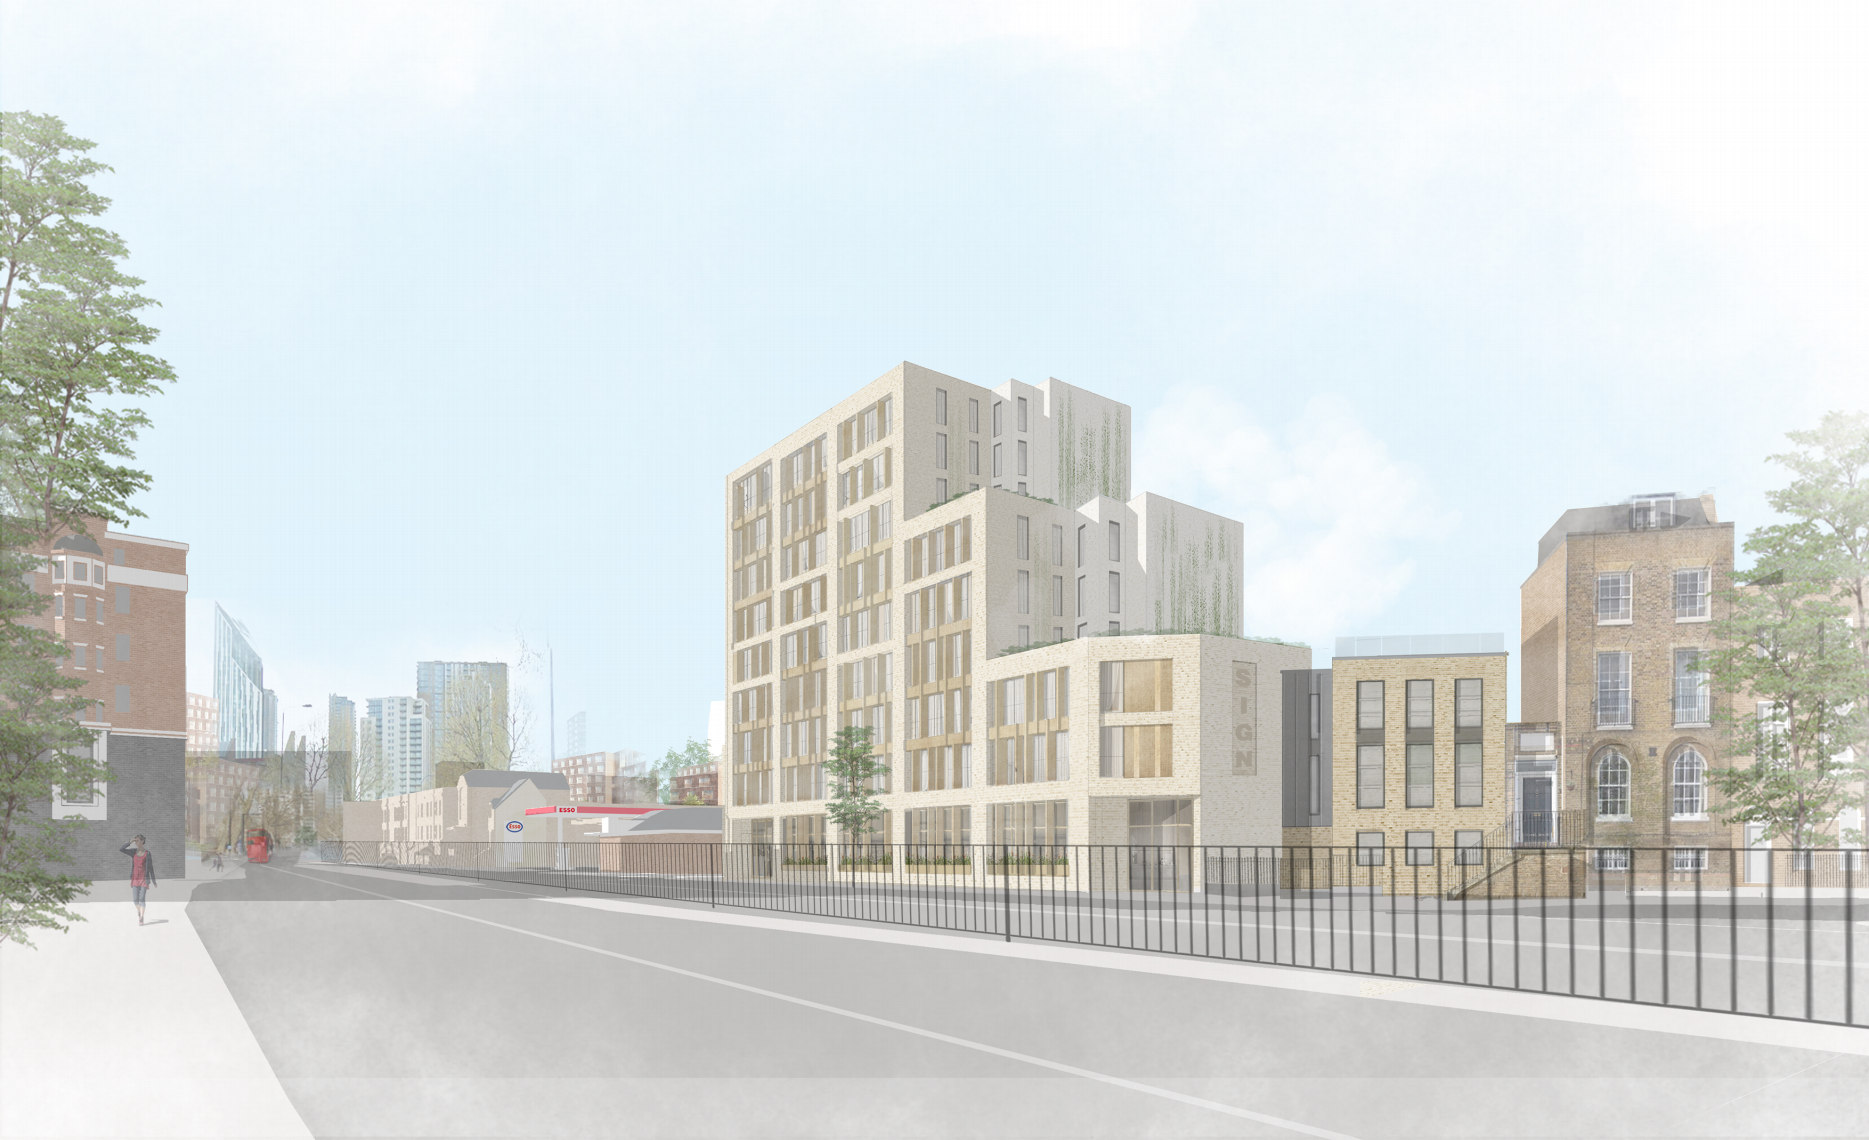 200-room ‘mid-market’ hotel proposed for New Kent Road